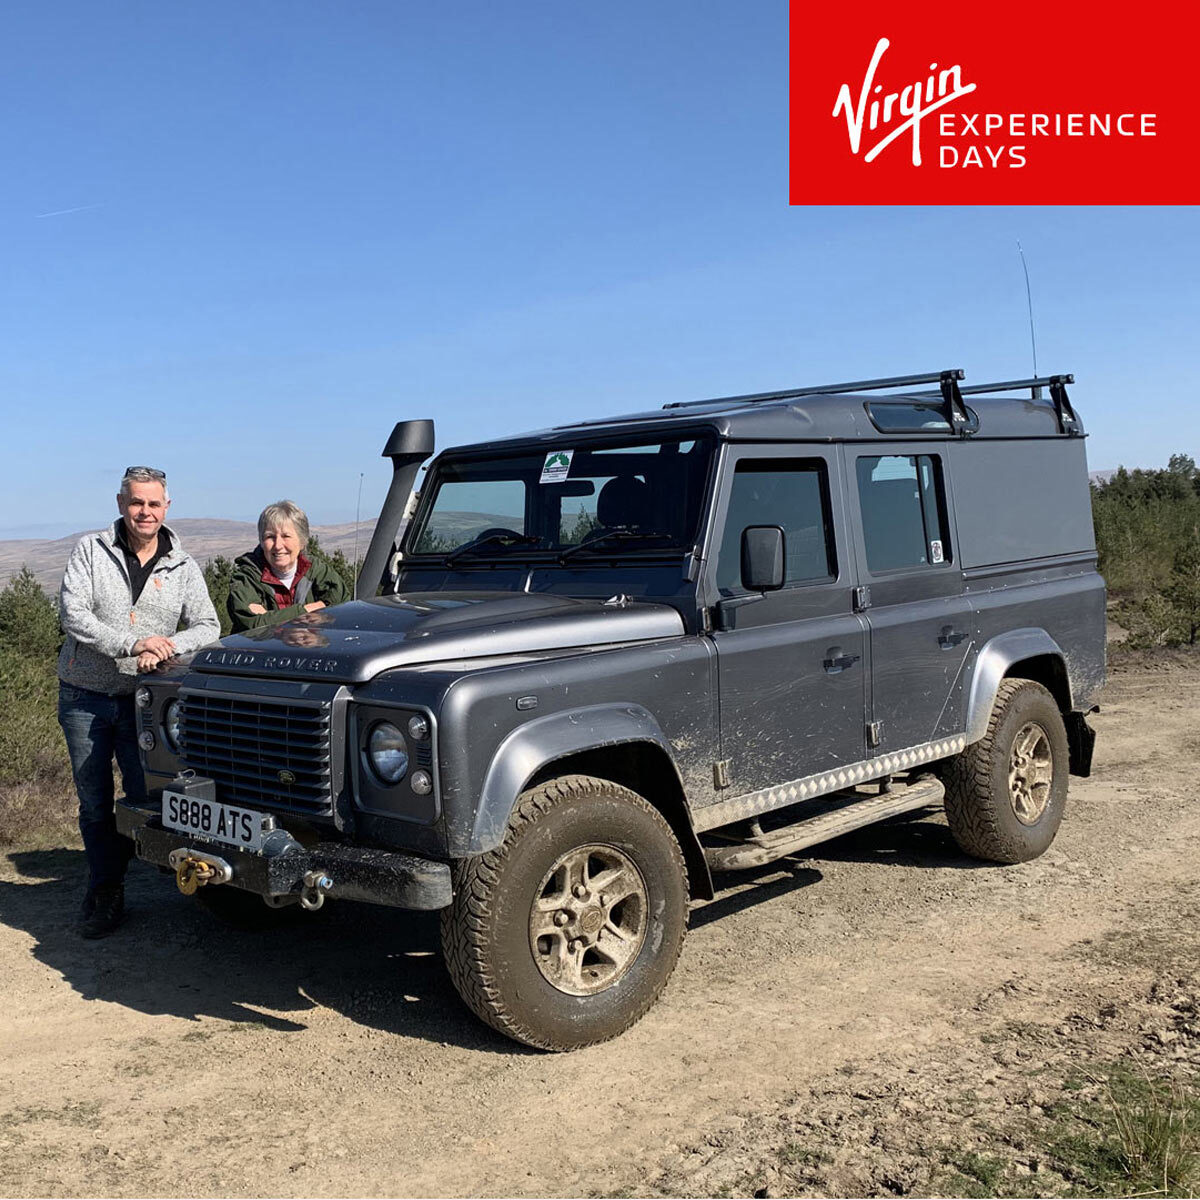 Buy Virgin Experience Introductory Off Road Driving Image2 at Costco.co.uk